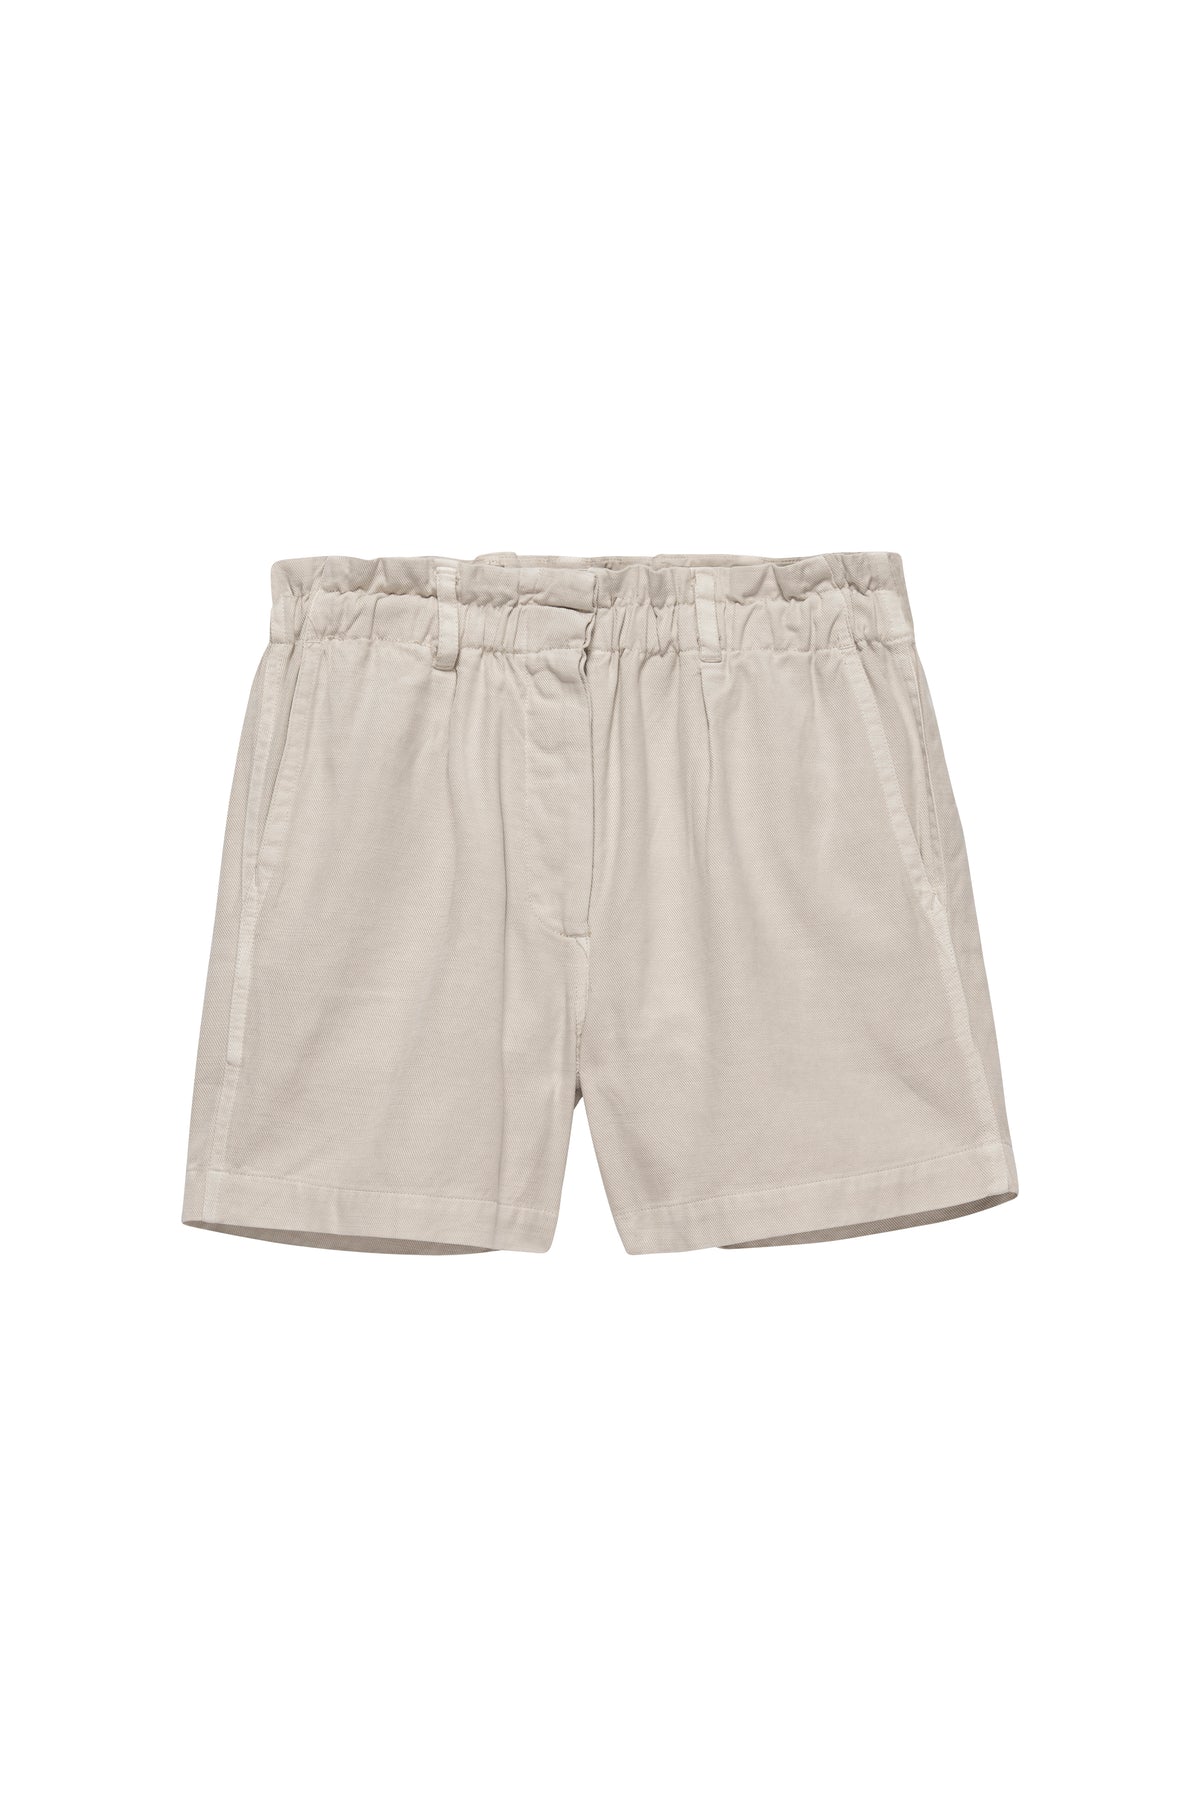 Stone coloured paper bag shorts with slant pockets and welt rear pockets